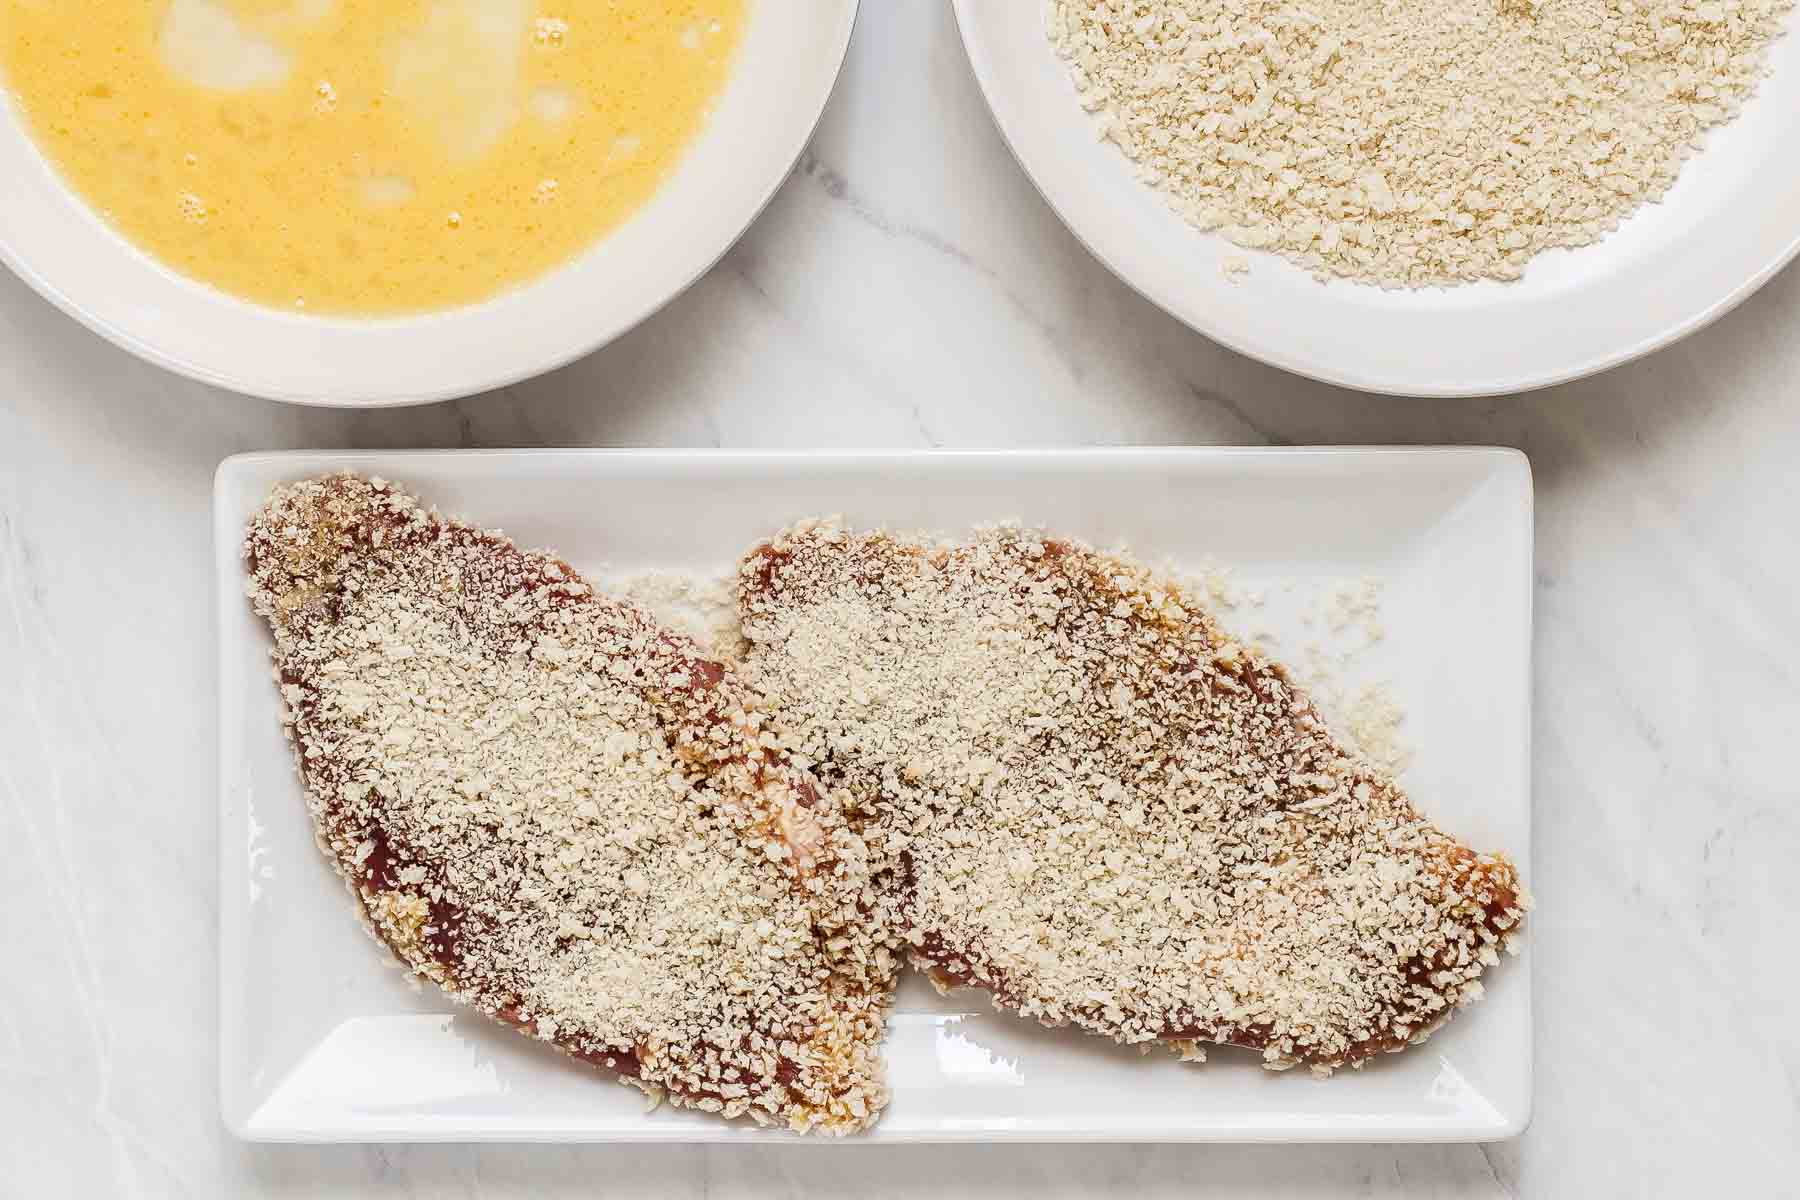 Cutlets dipped in egg and bread crumbs resting on plate.